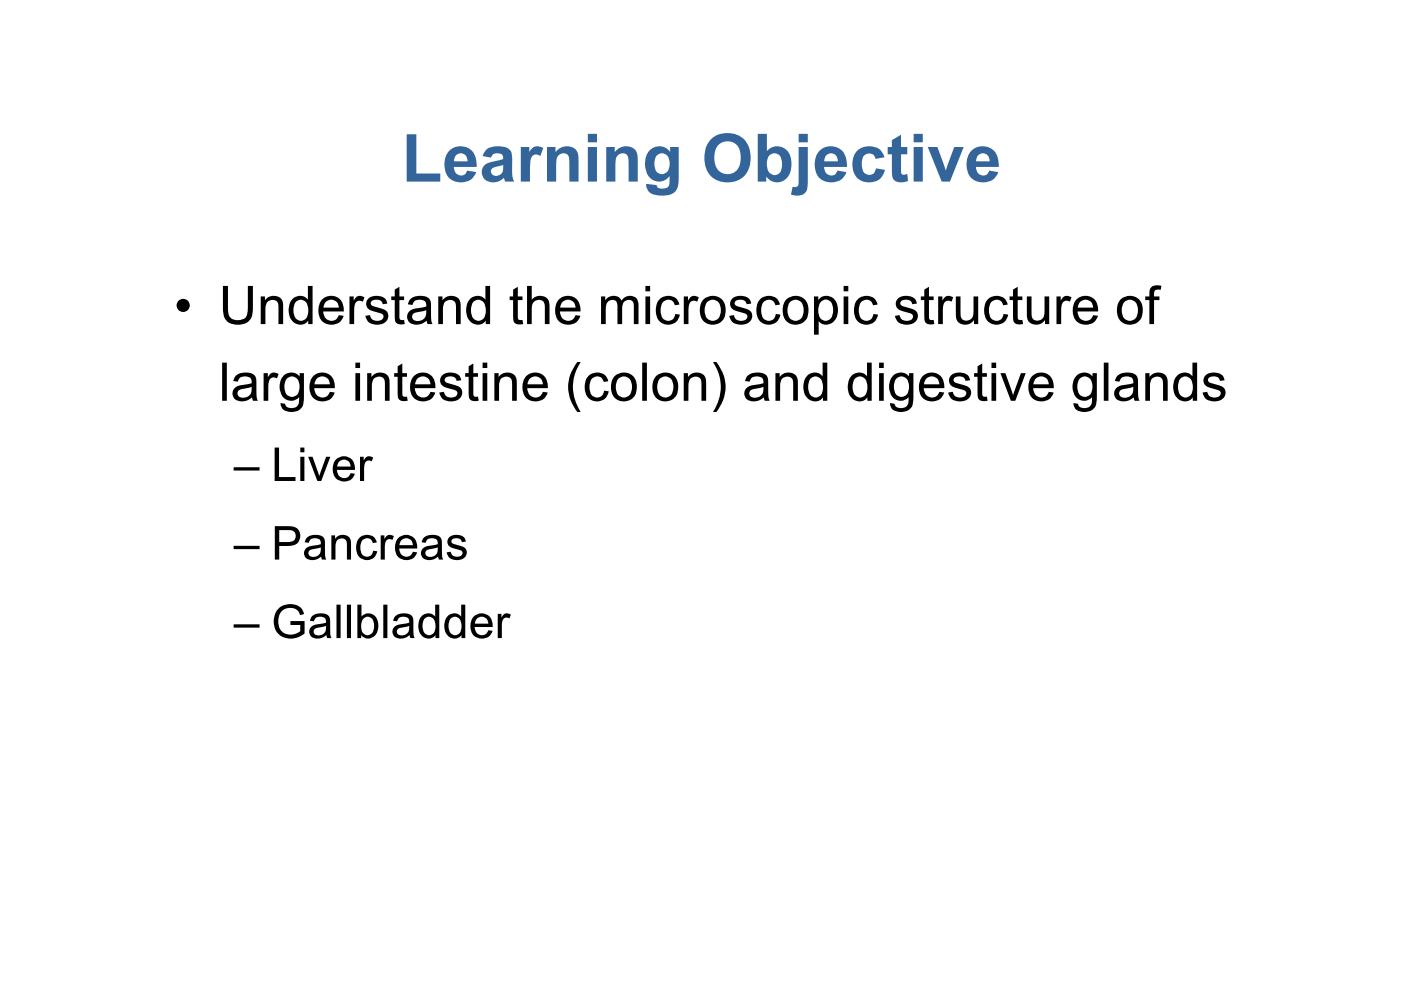 block10-2_04.jpg - Learning Objective¡E Understand the microscopic structure of  large intestine (colon) and digestive glands  ¡V Liver  ¡V Pancreas  ¡V Gallbladder